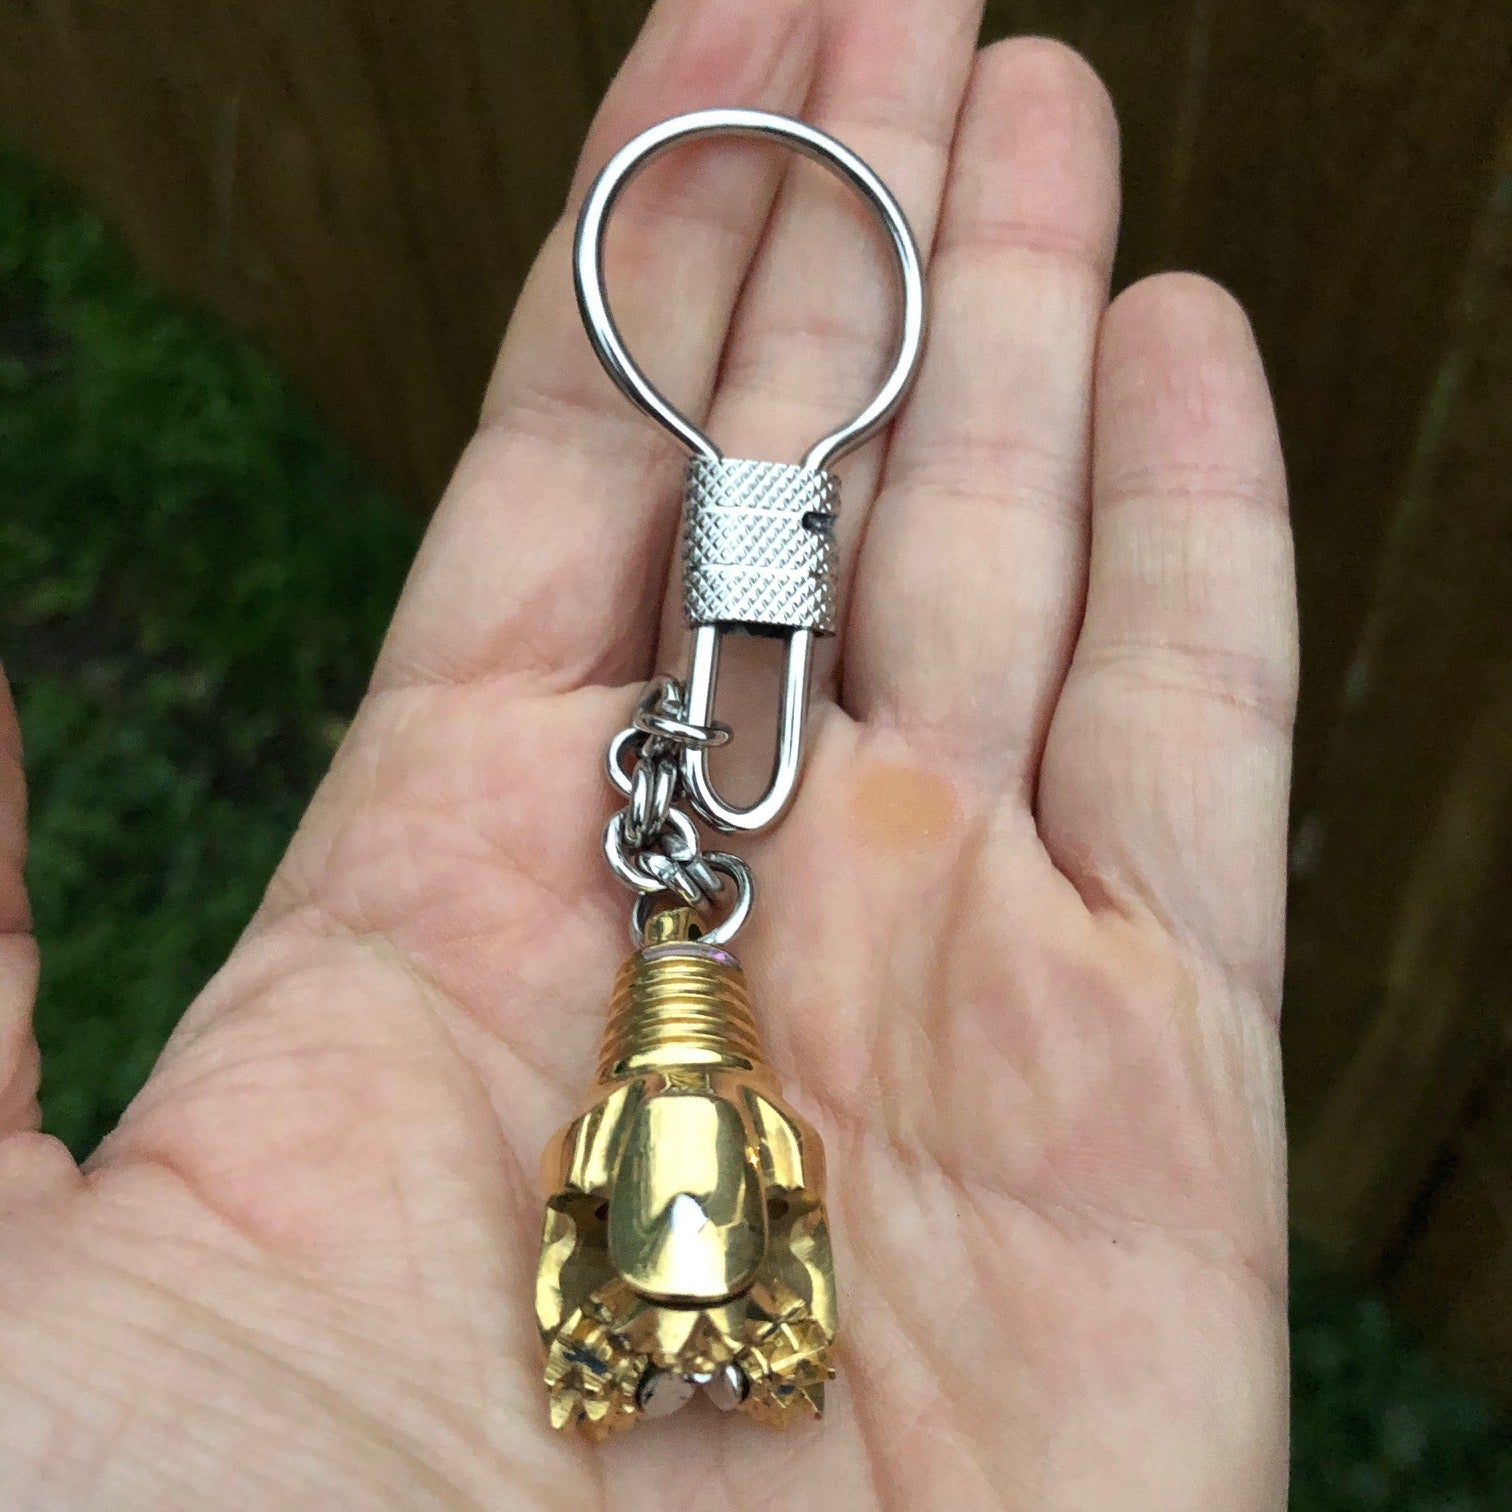 Oilfield Stainless Steel and Bronze Tricone Drill Bit Keychains